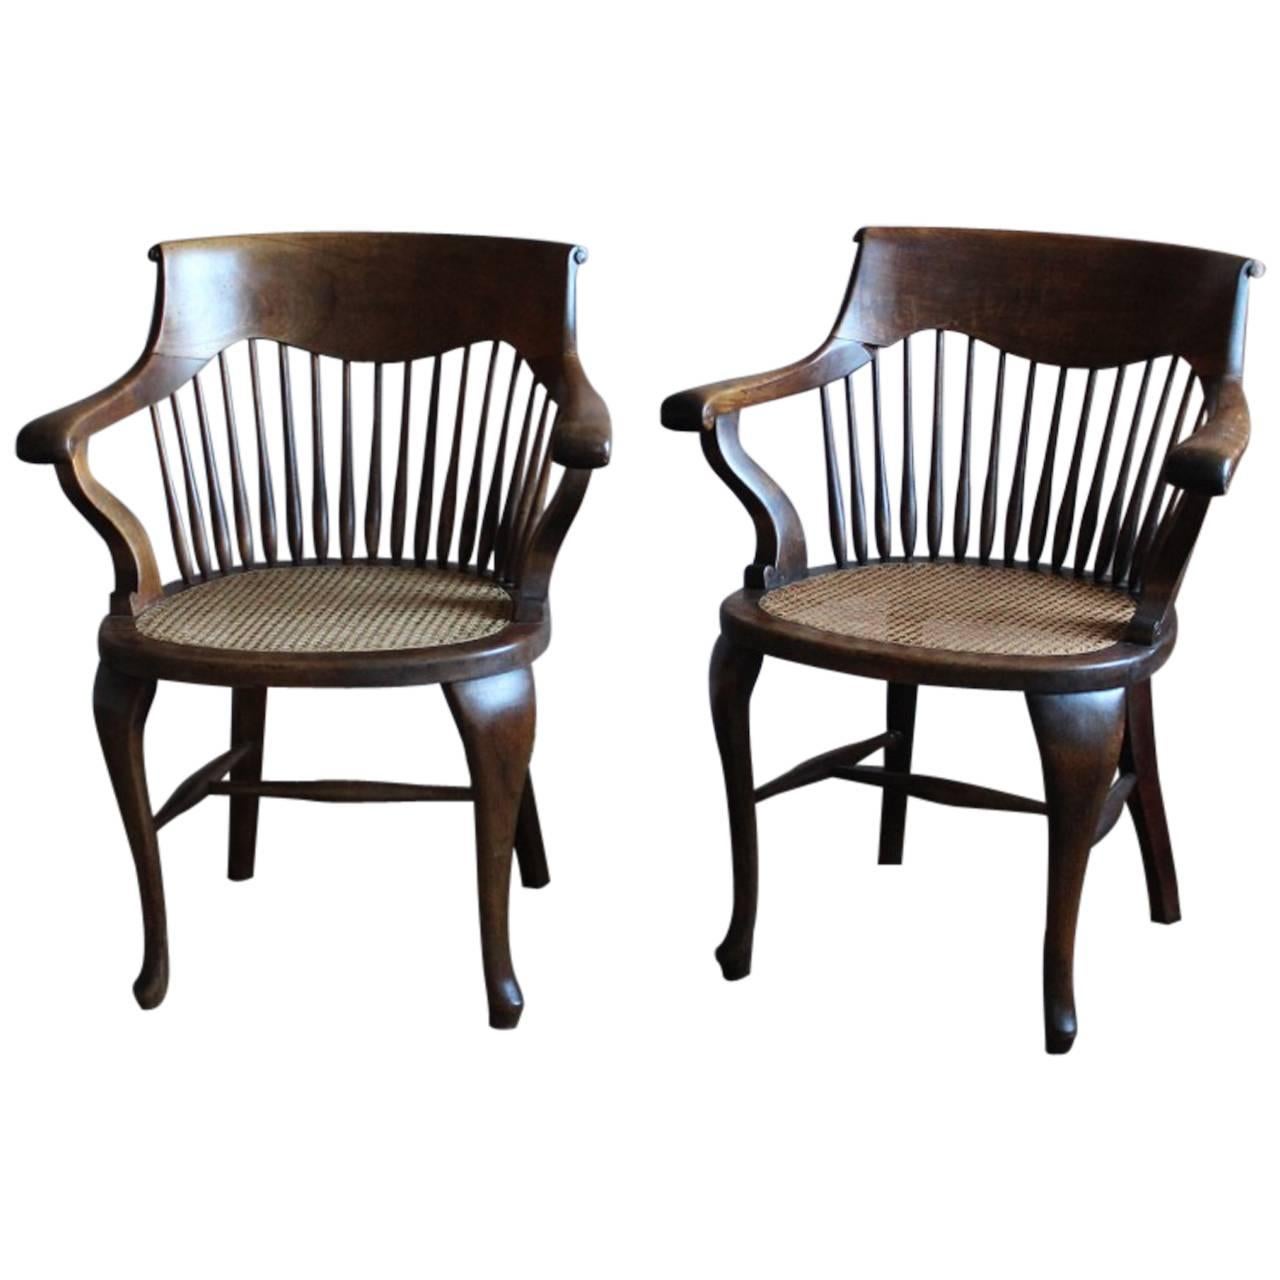 Pair of English Desk Chairs by Schoolbred & Co